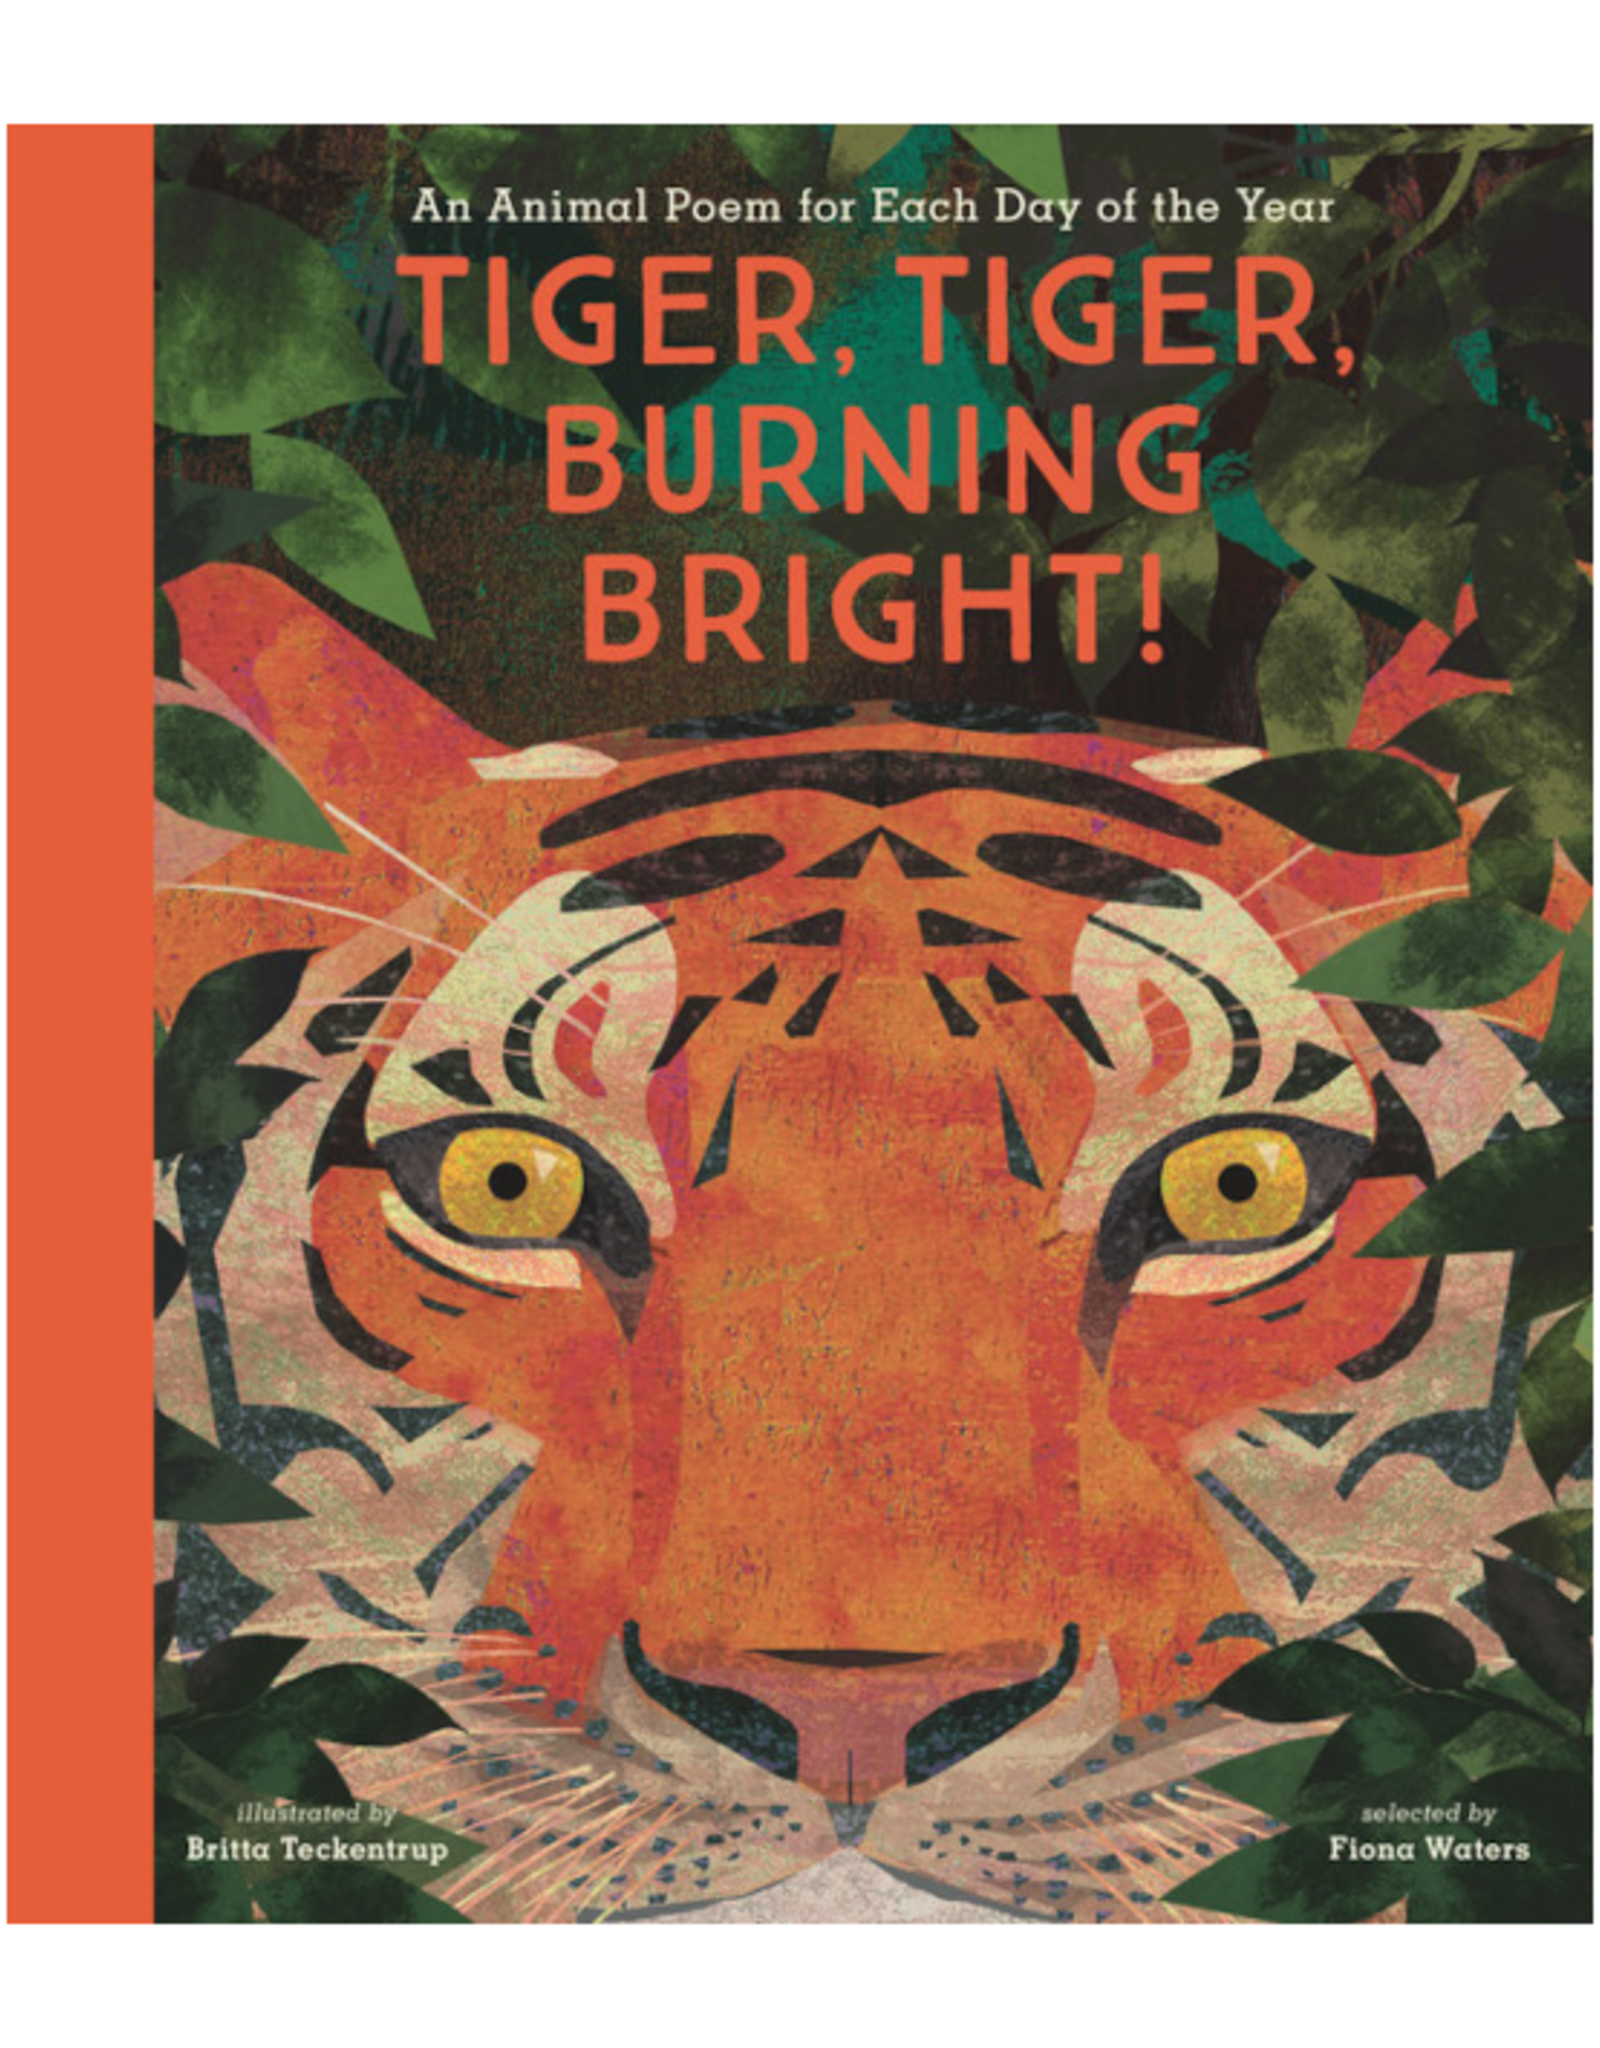 Penguin Random House Books Book - Tiger, Tiger, Burning Bright! An Animal Poem for Each Day of the Year